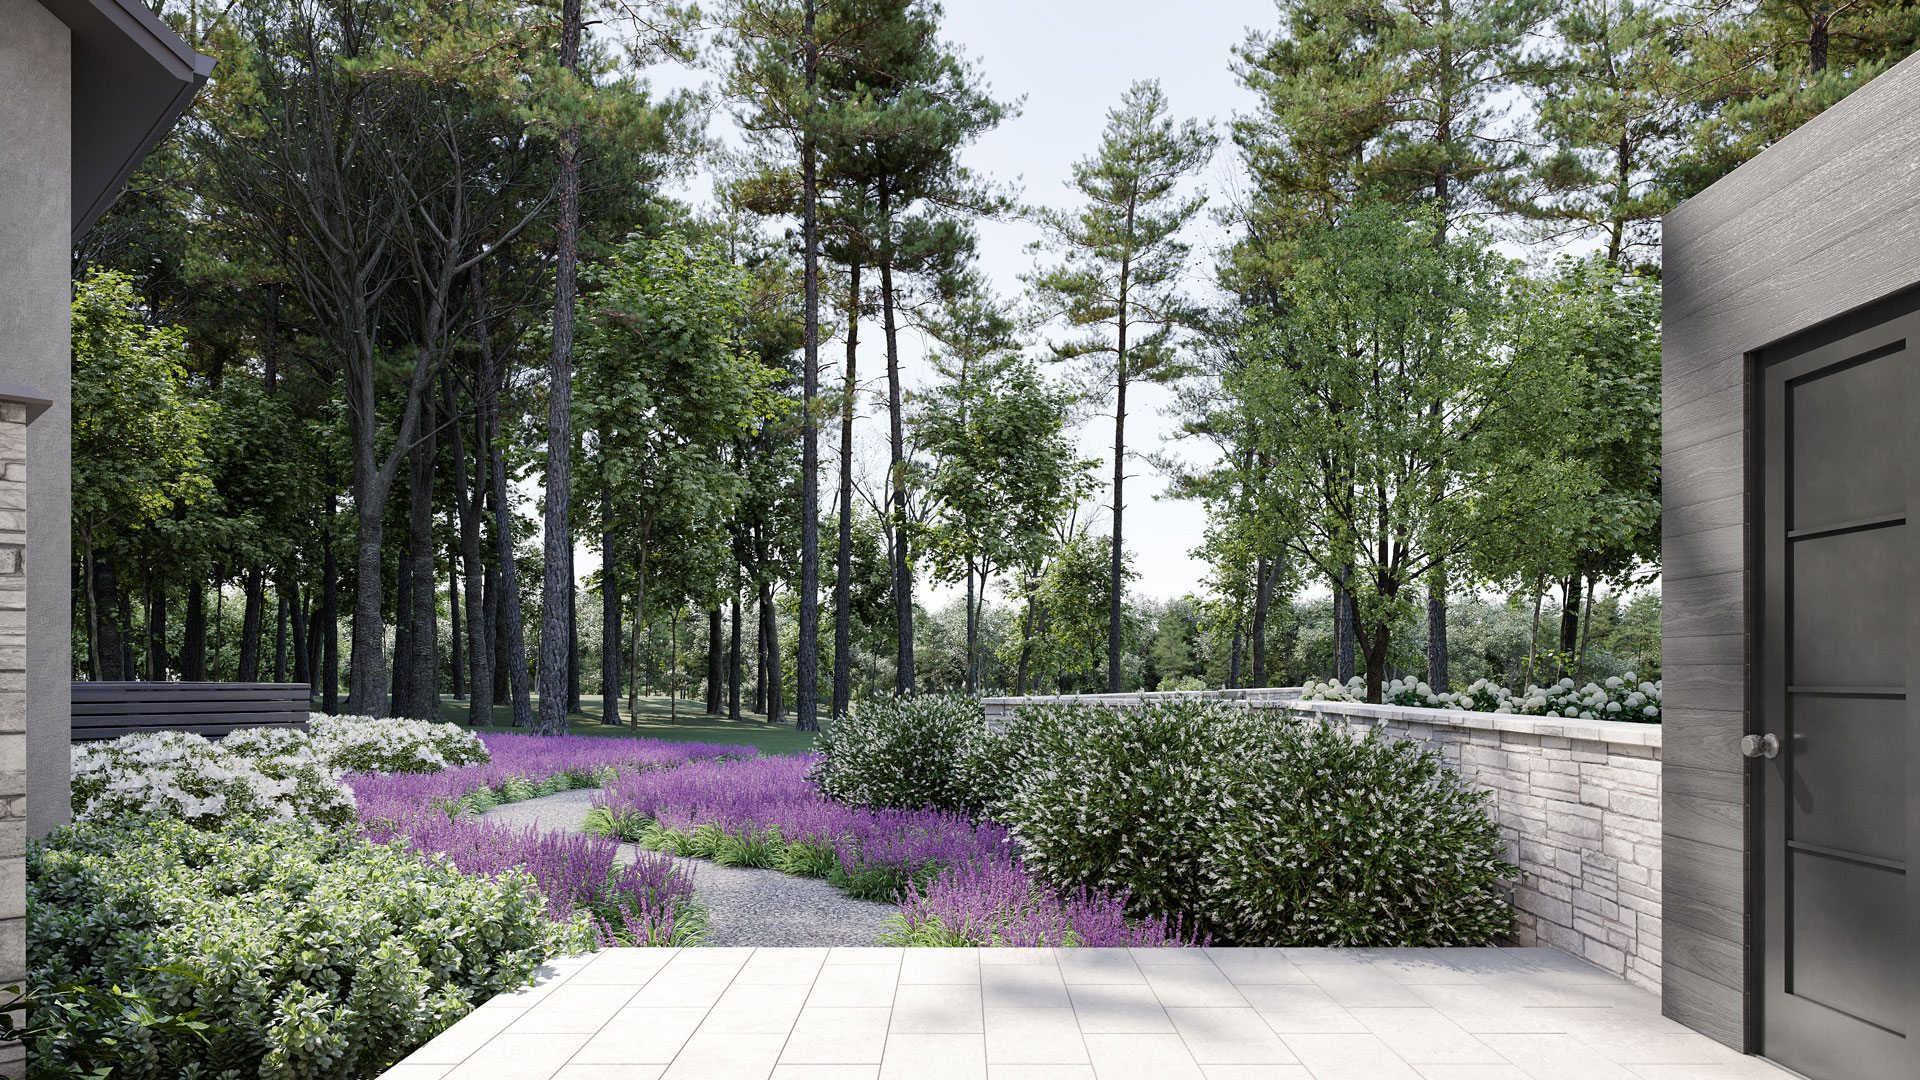 Exterior Renderings for a House in Georgia: the Garden